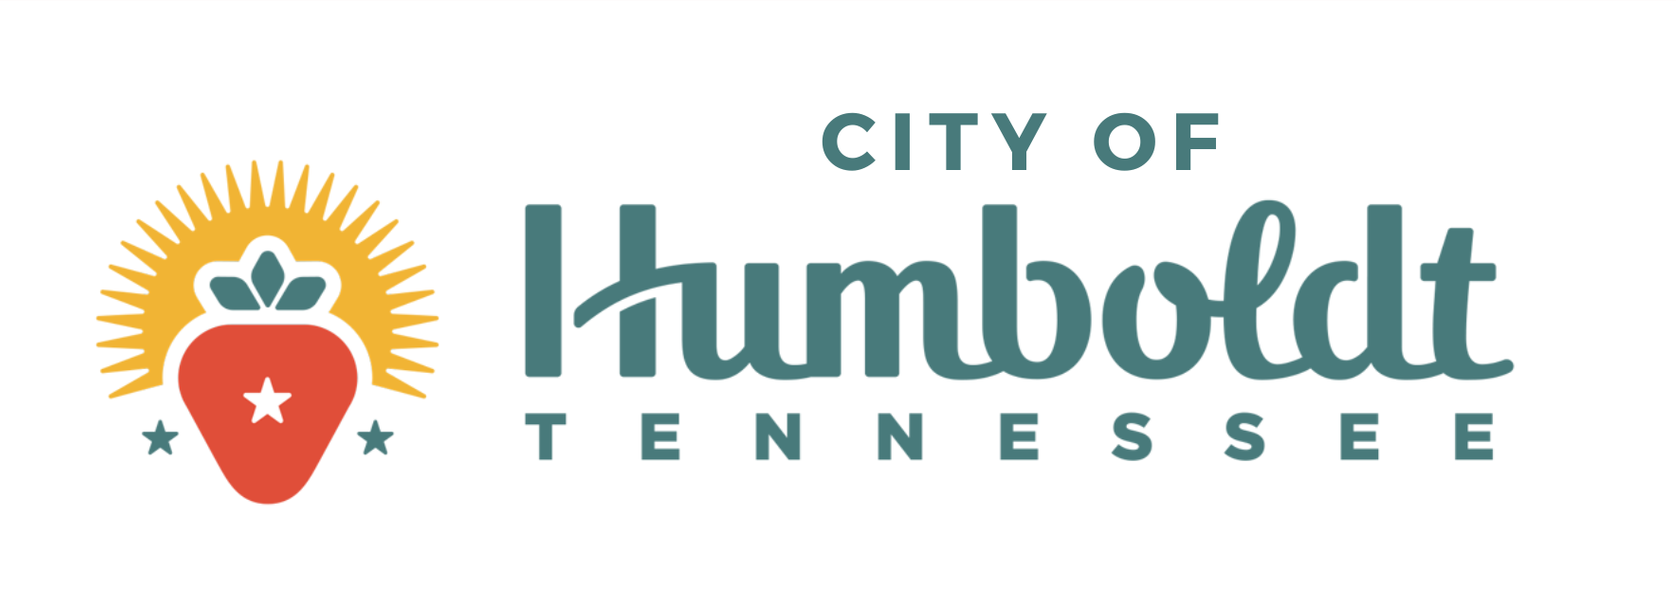 City of Humboldt, Tennessee Logo - straberry in the sunshine